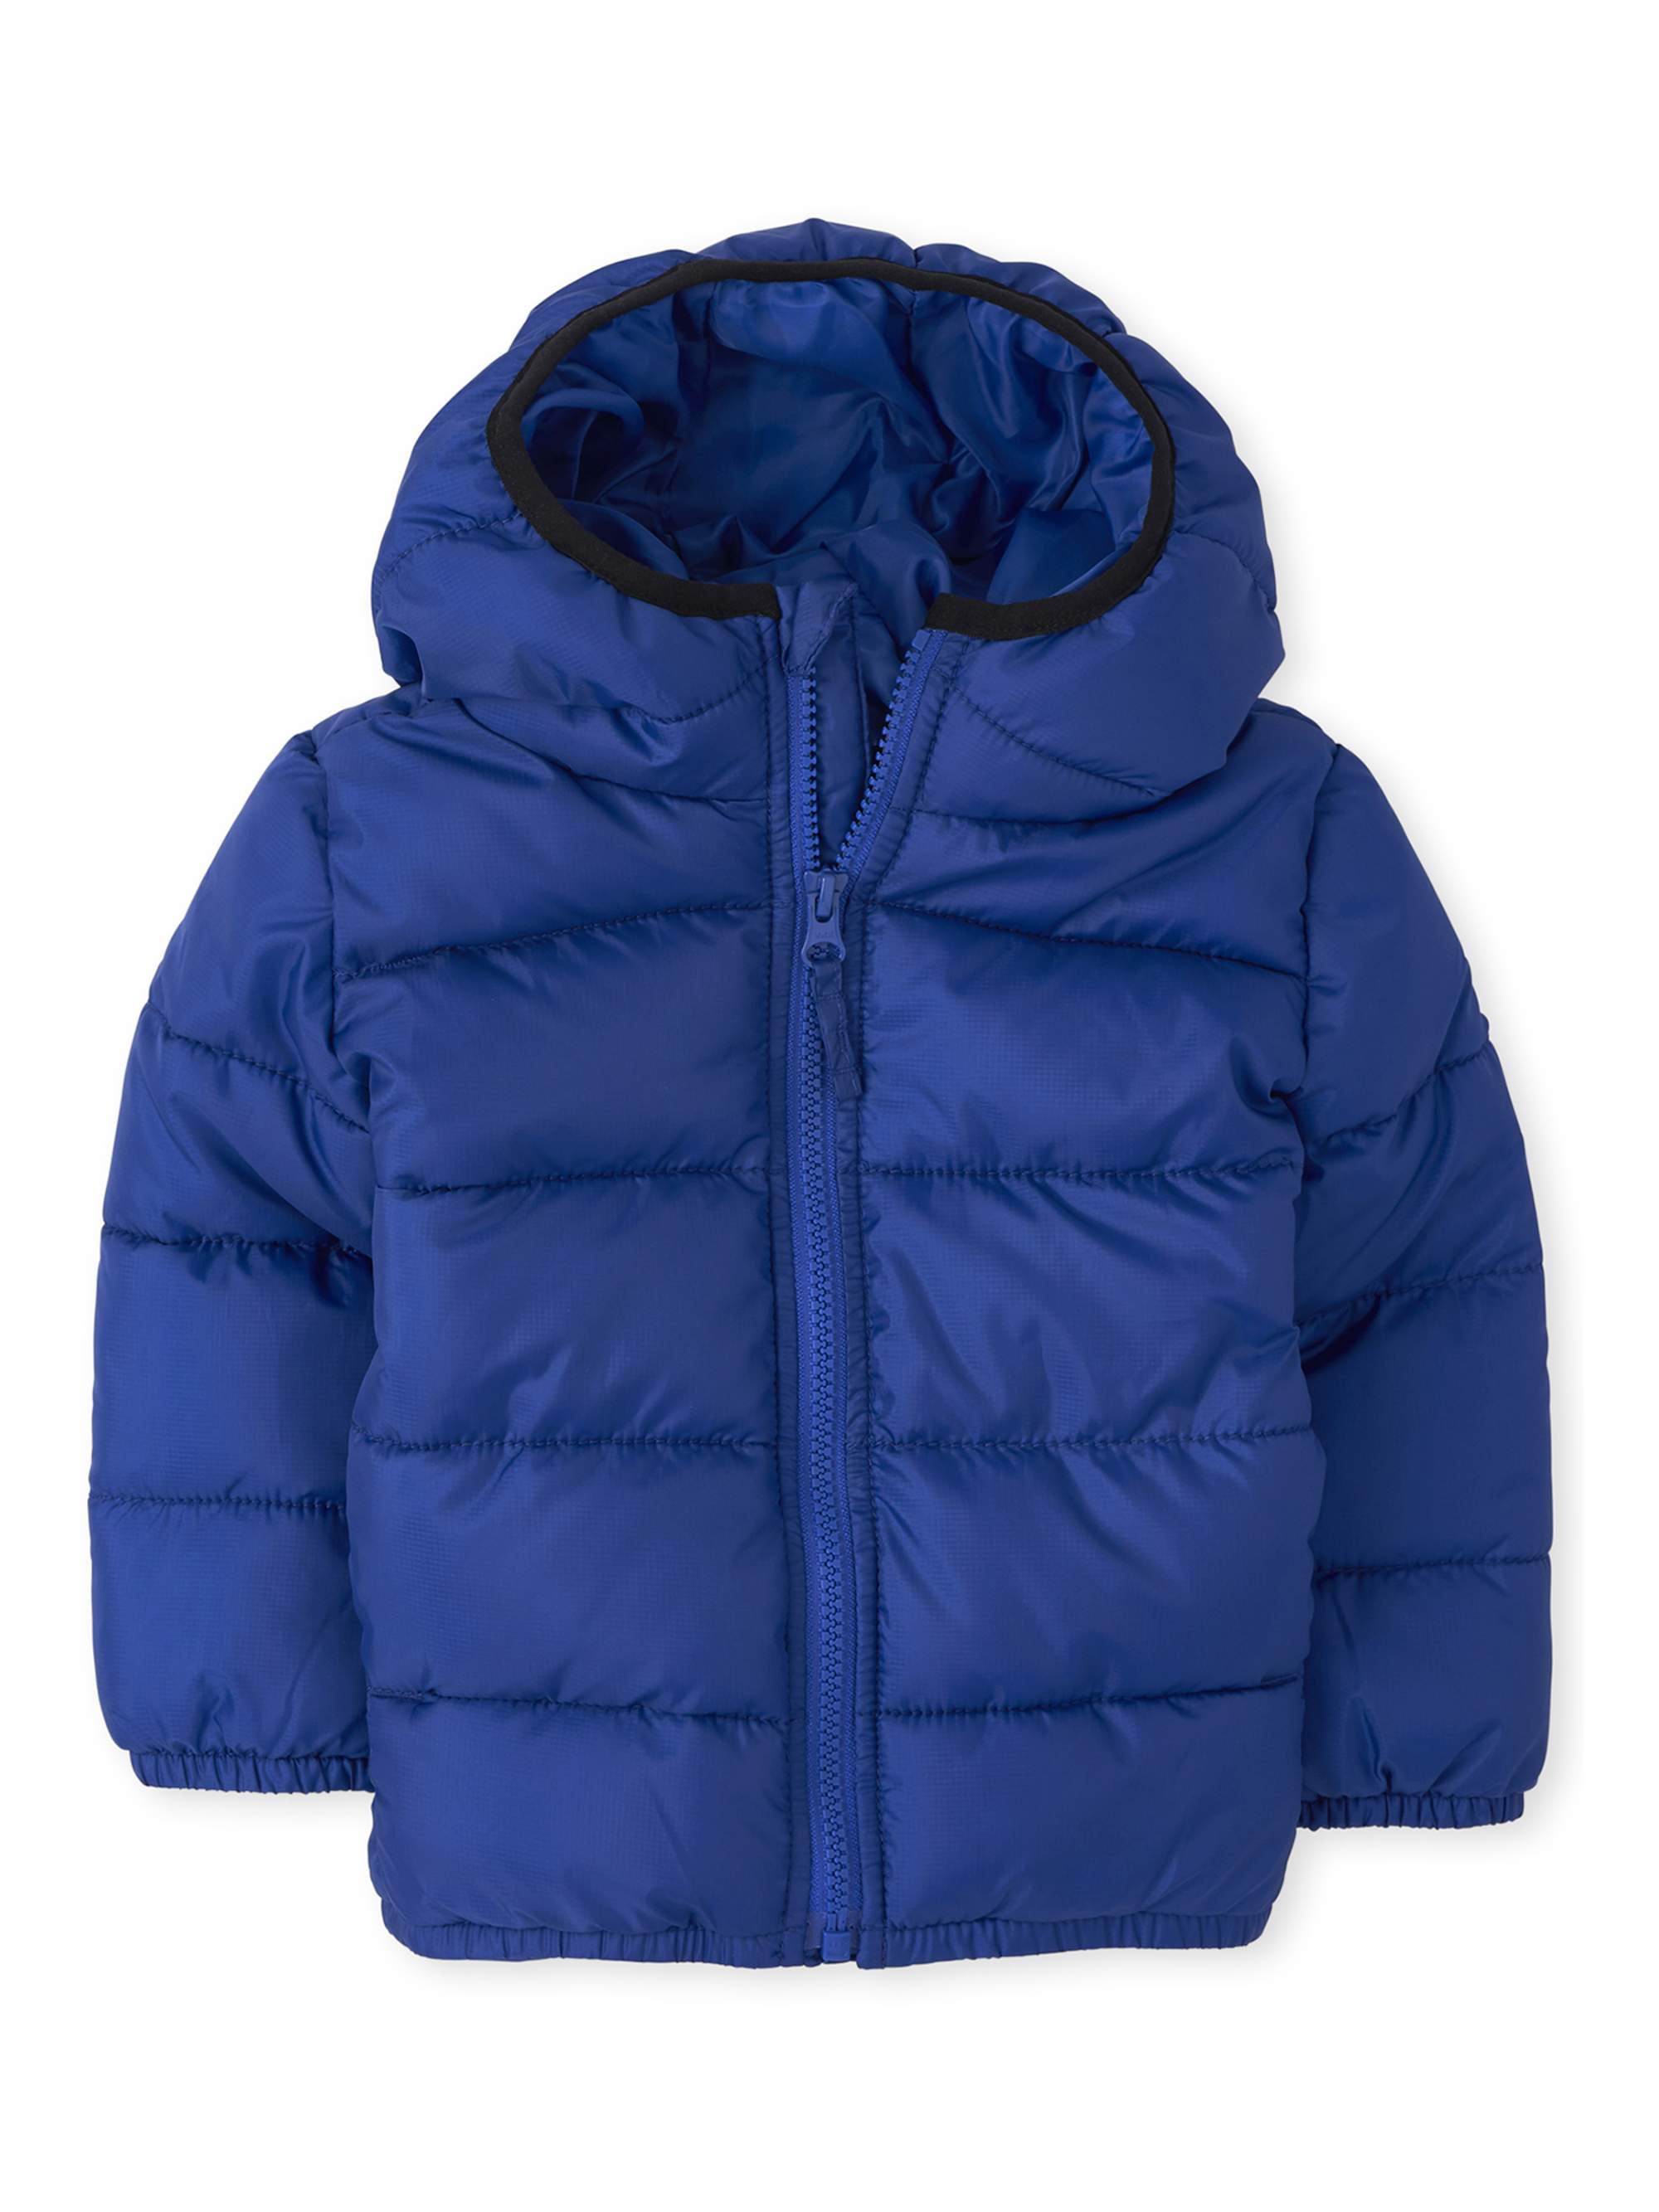 Best Toddler Winter Coats Of 2023 | lupon.gov.ph